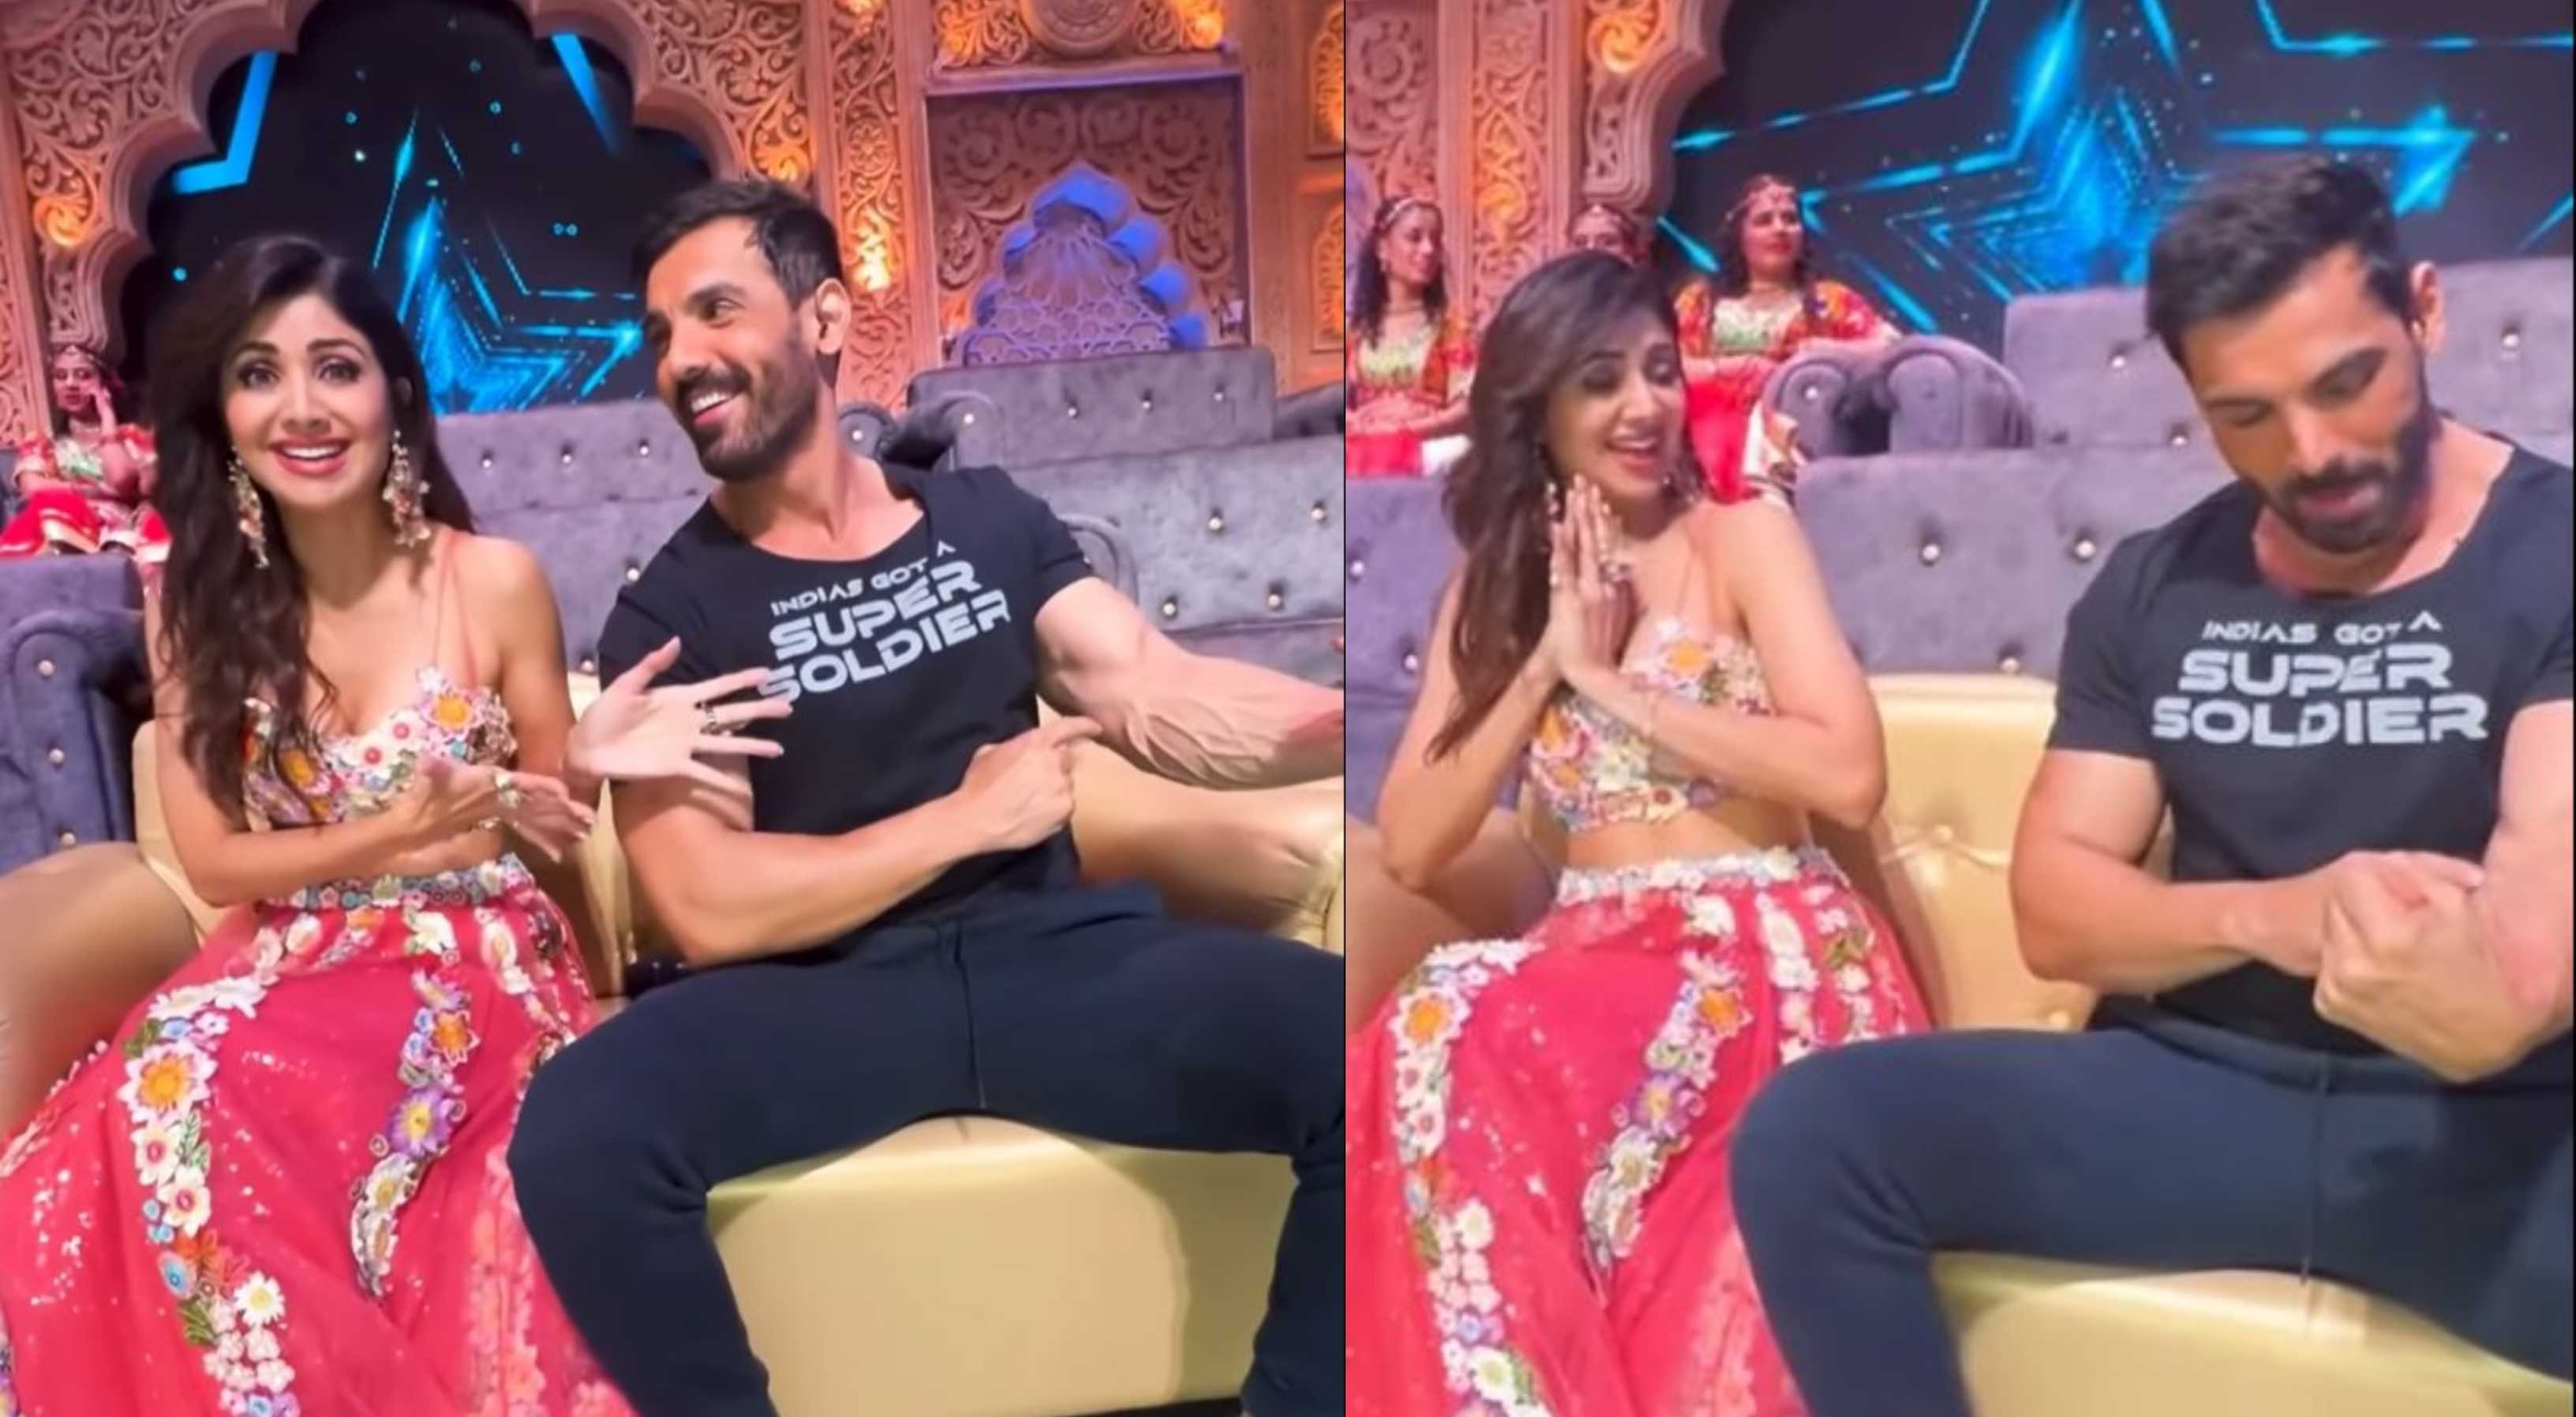 John Abraham makes Shilpa Shetty scream ‘Attack’ after he flexes his muscles to make a map; watch